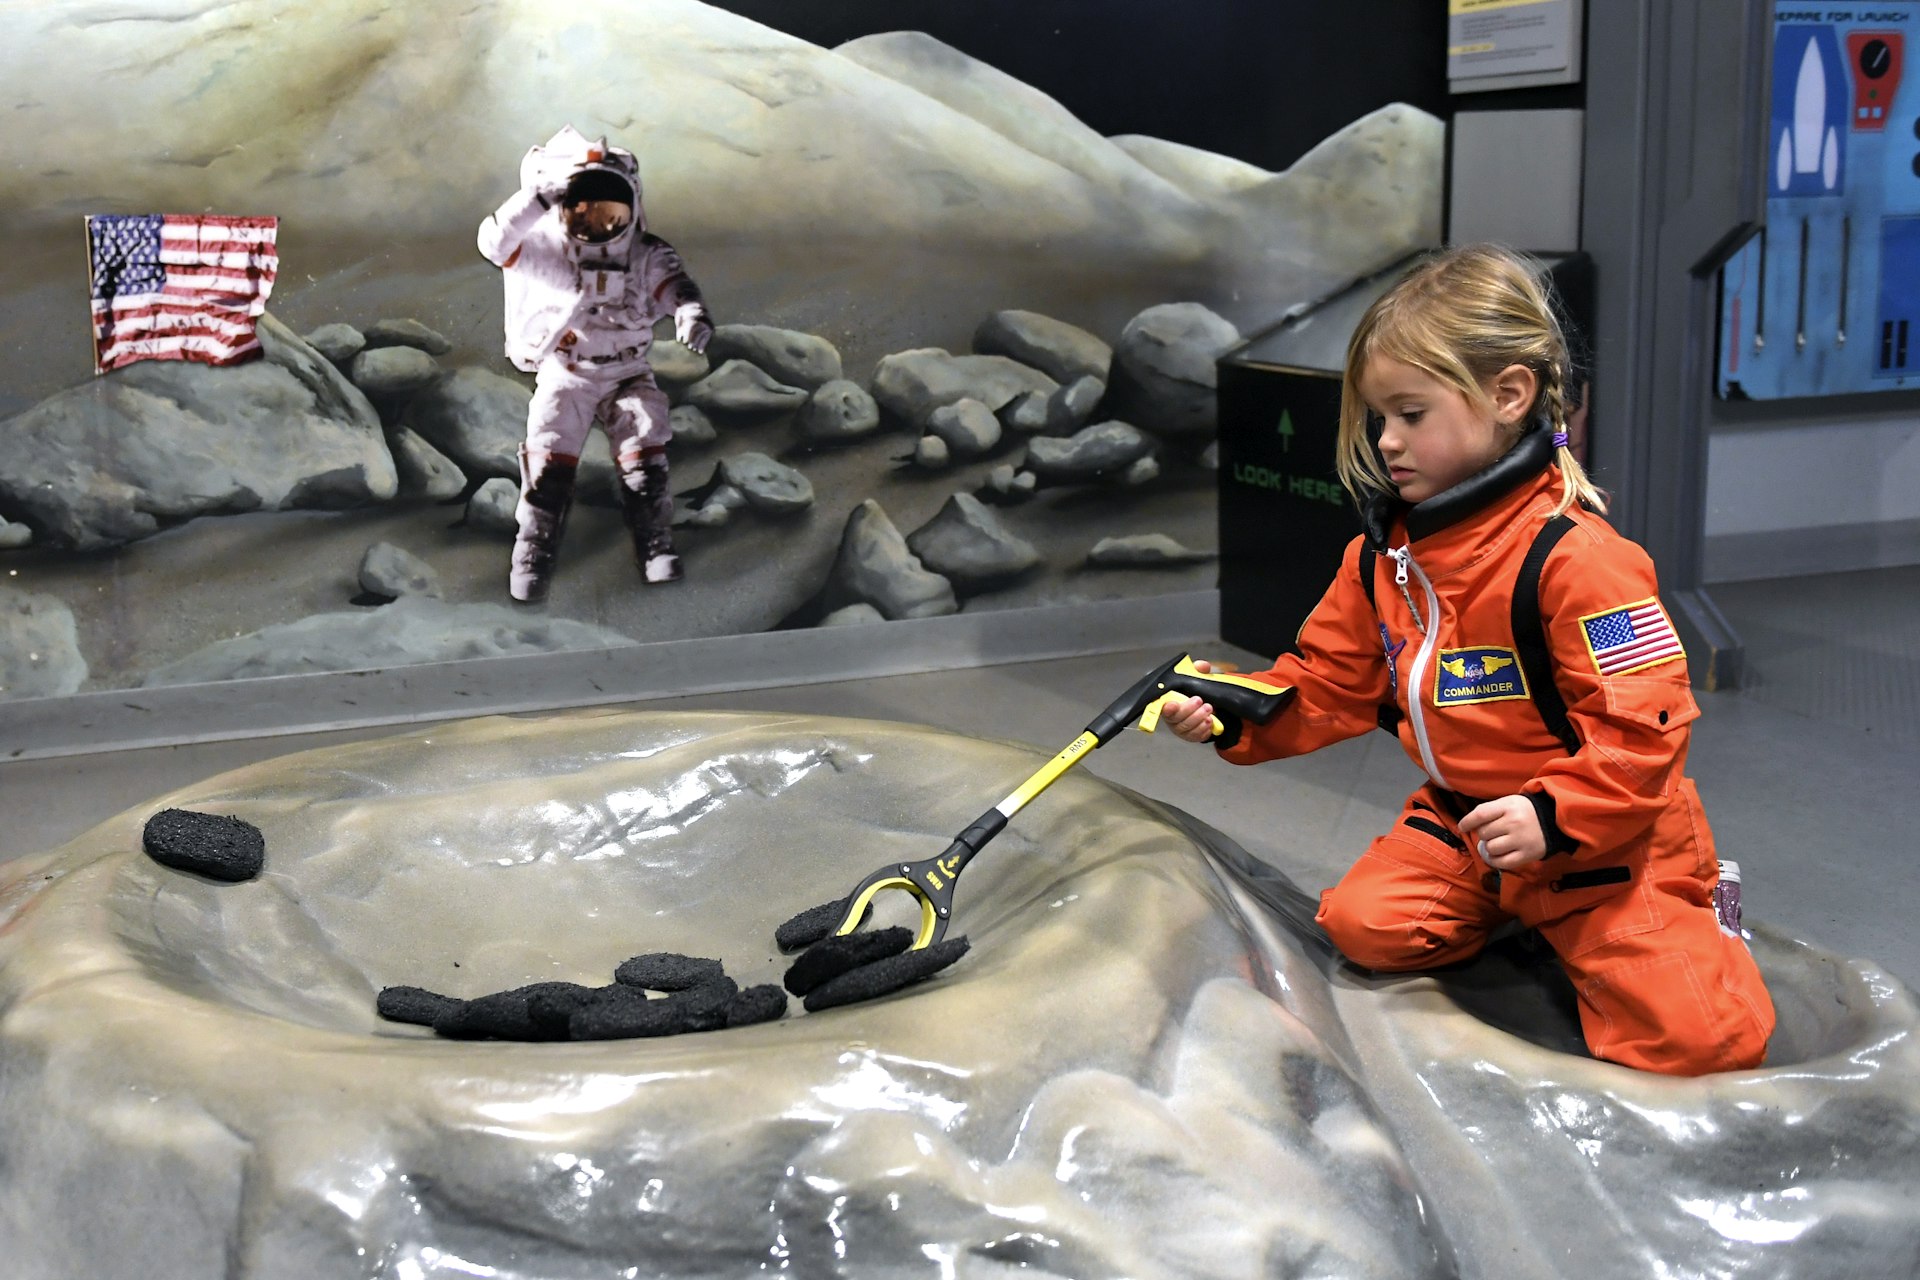 Matilda Sinclair 3, picking up moon rocks while in AstroTot Training at the Denver Museum of Nature & Science with her nanny Jean Wood of Denver during the landing event for the InSightLander that launched from Vandenberg Air Force Base